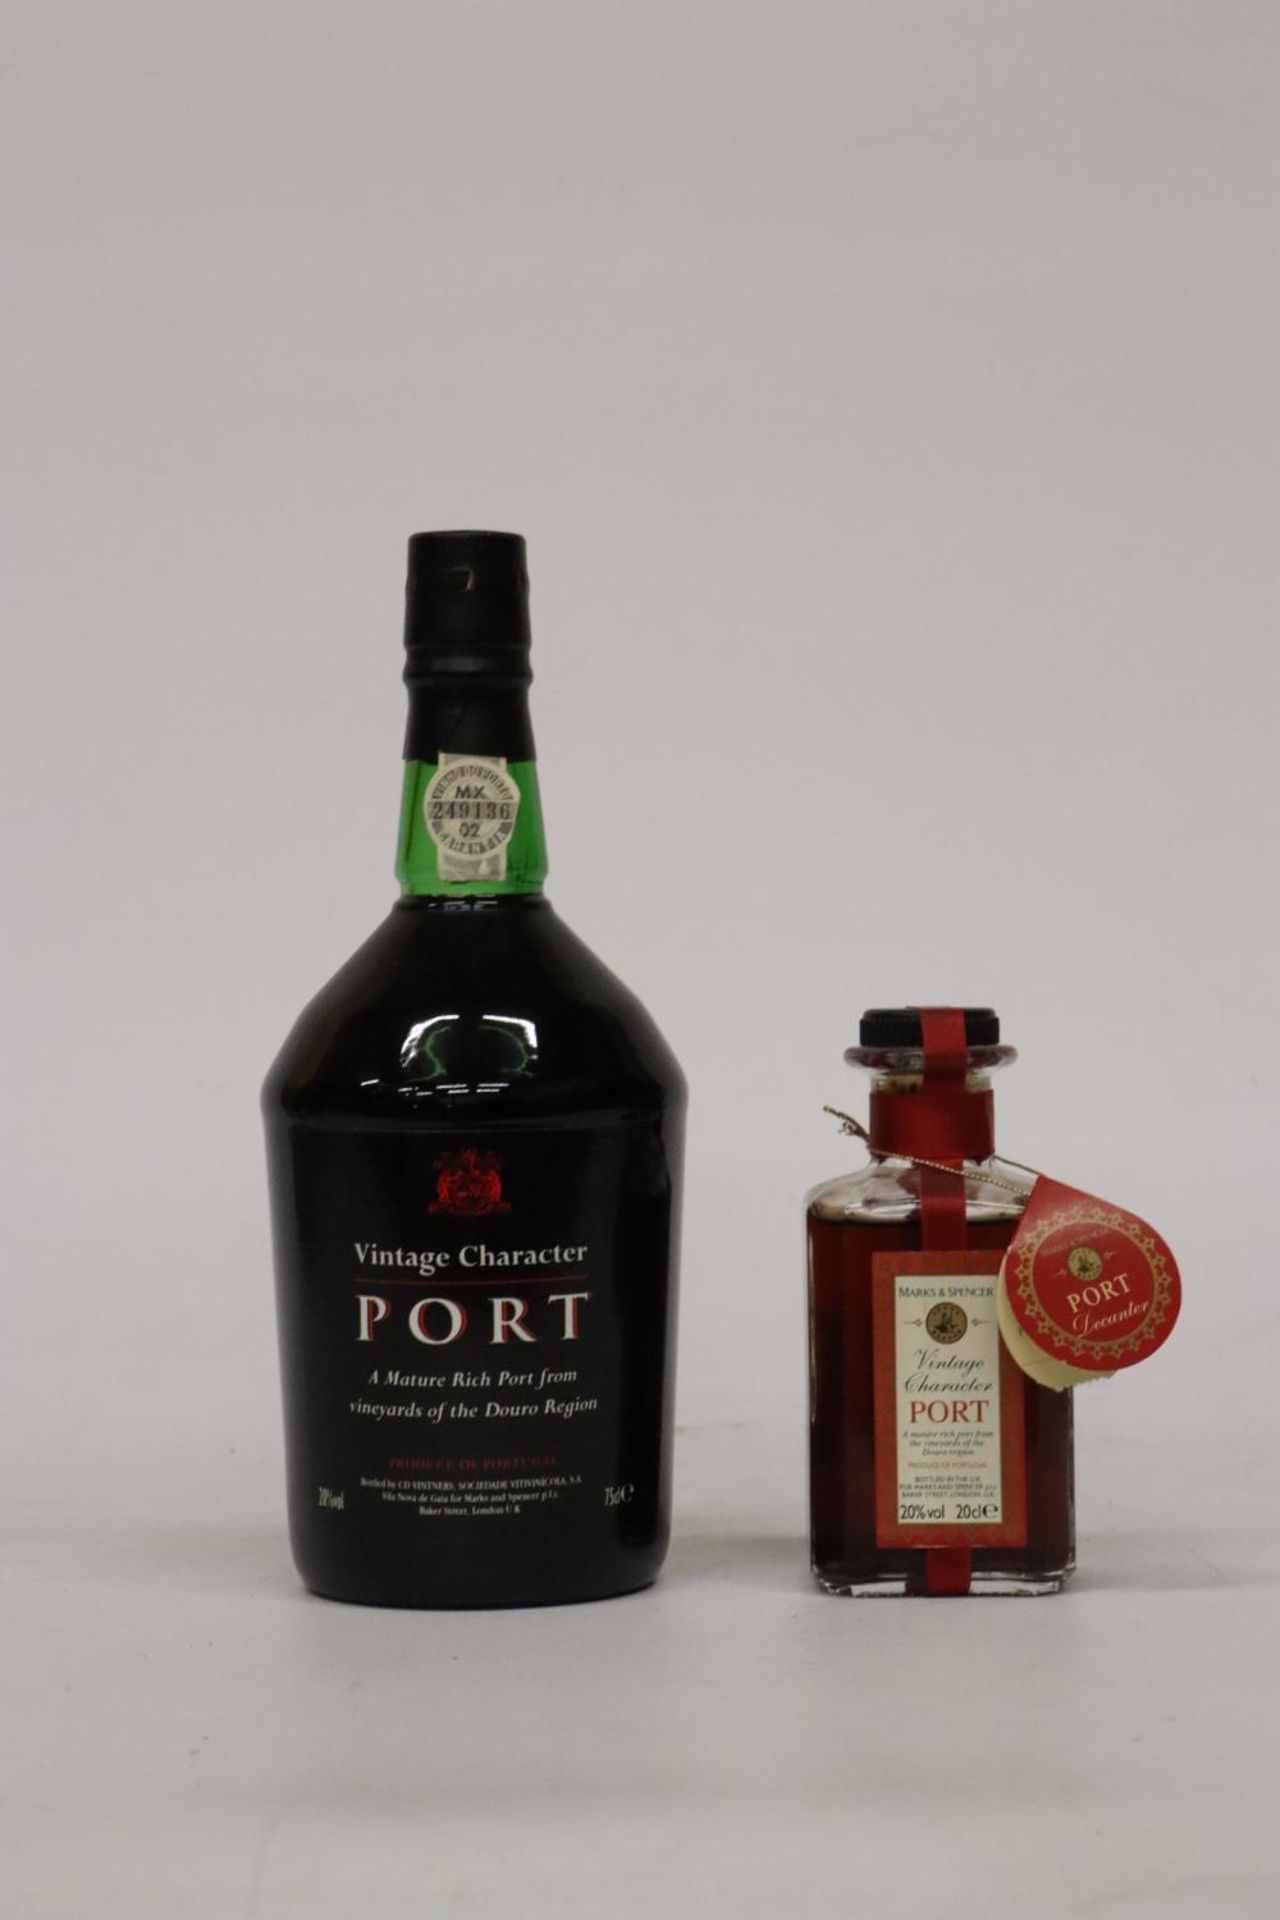 TWO BOTTLES OF VINTAGE CHARACTER PORT TO INCLUDE A 70CL AND A 20CL